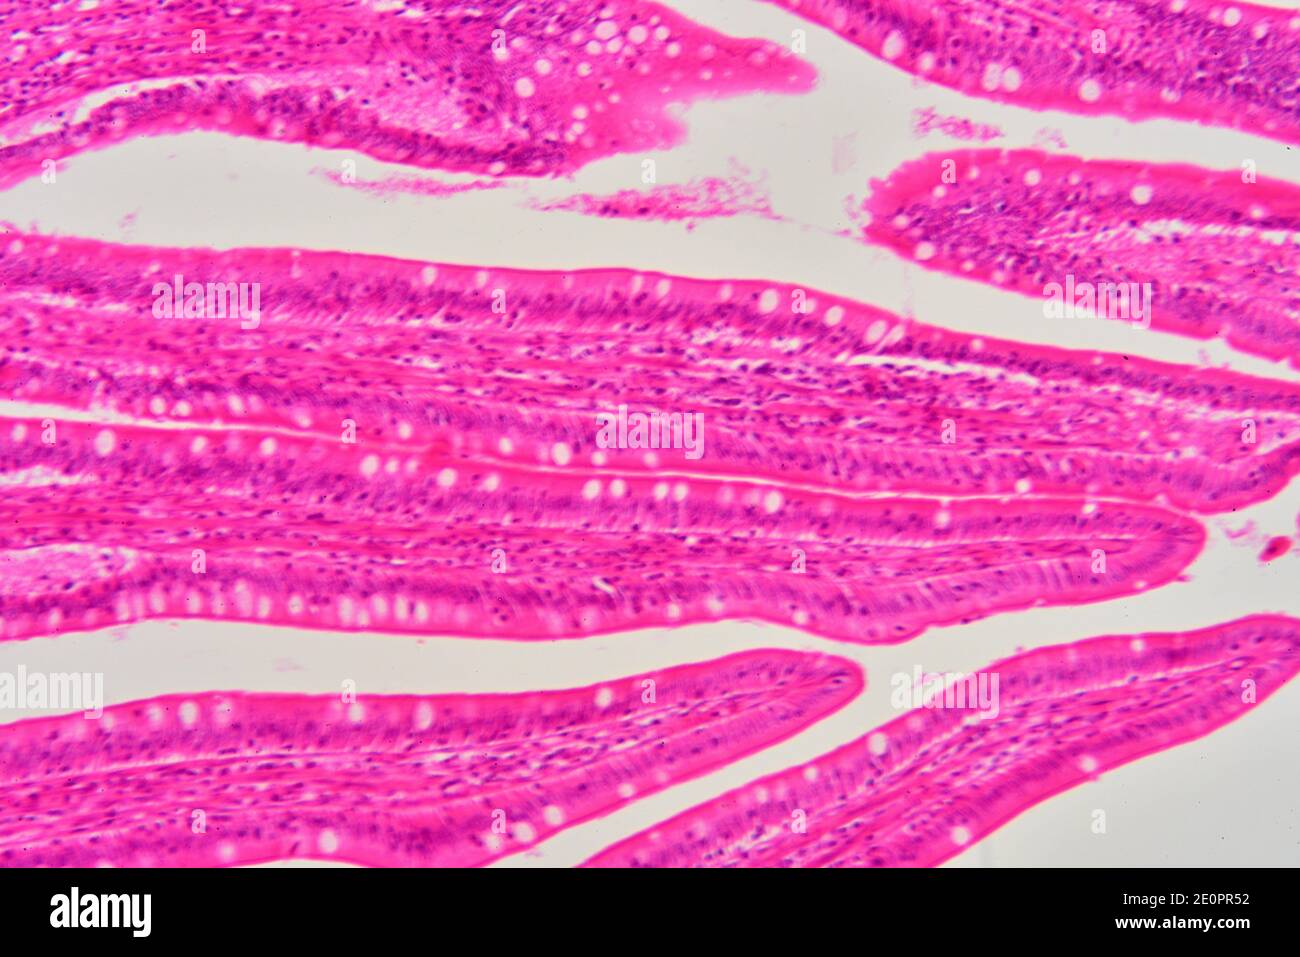 Human small intestine showing mucosa with Lieberkhun crypts. X125 at 10 cm wide. Stock Photo